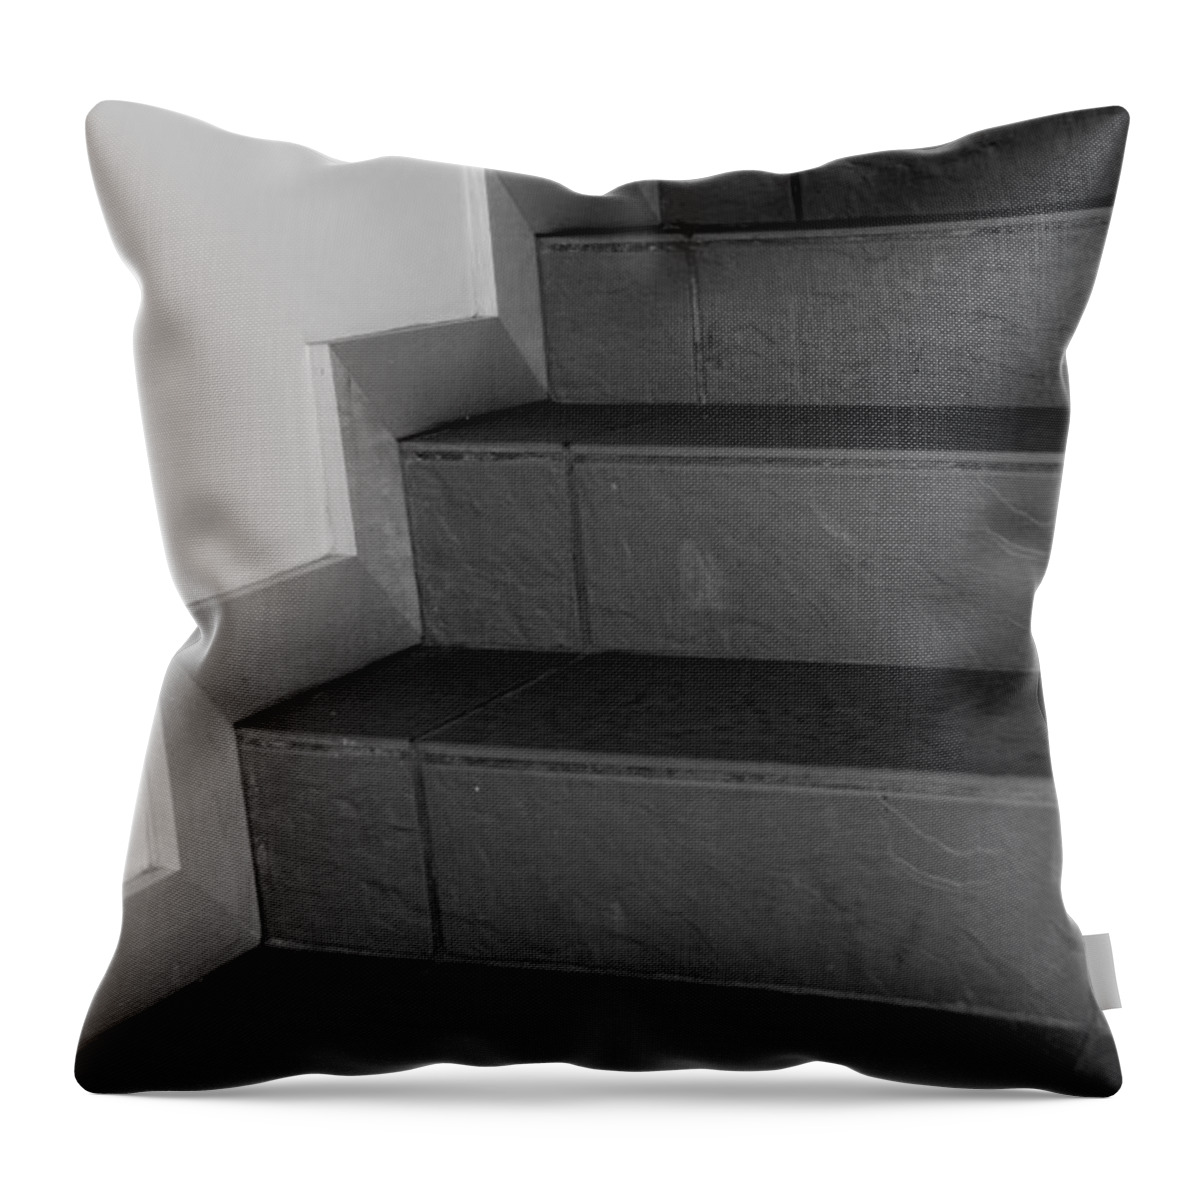 Steps Throw Pillow featuring the photograph 4 Steps by Rob Hans